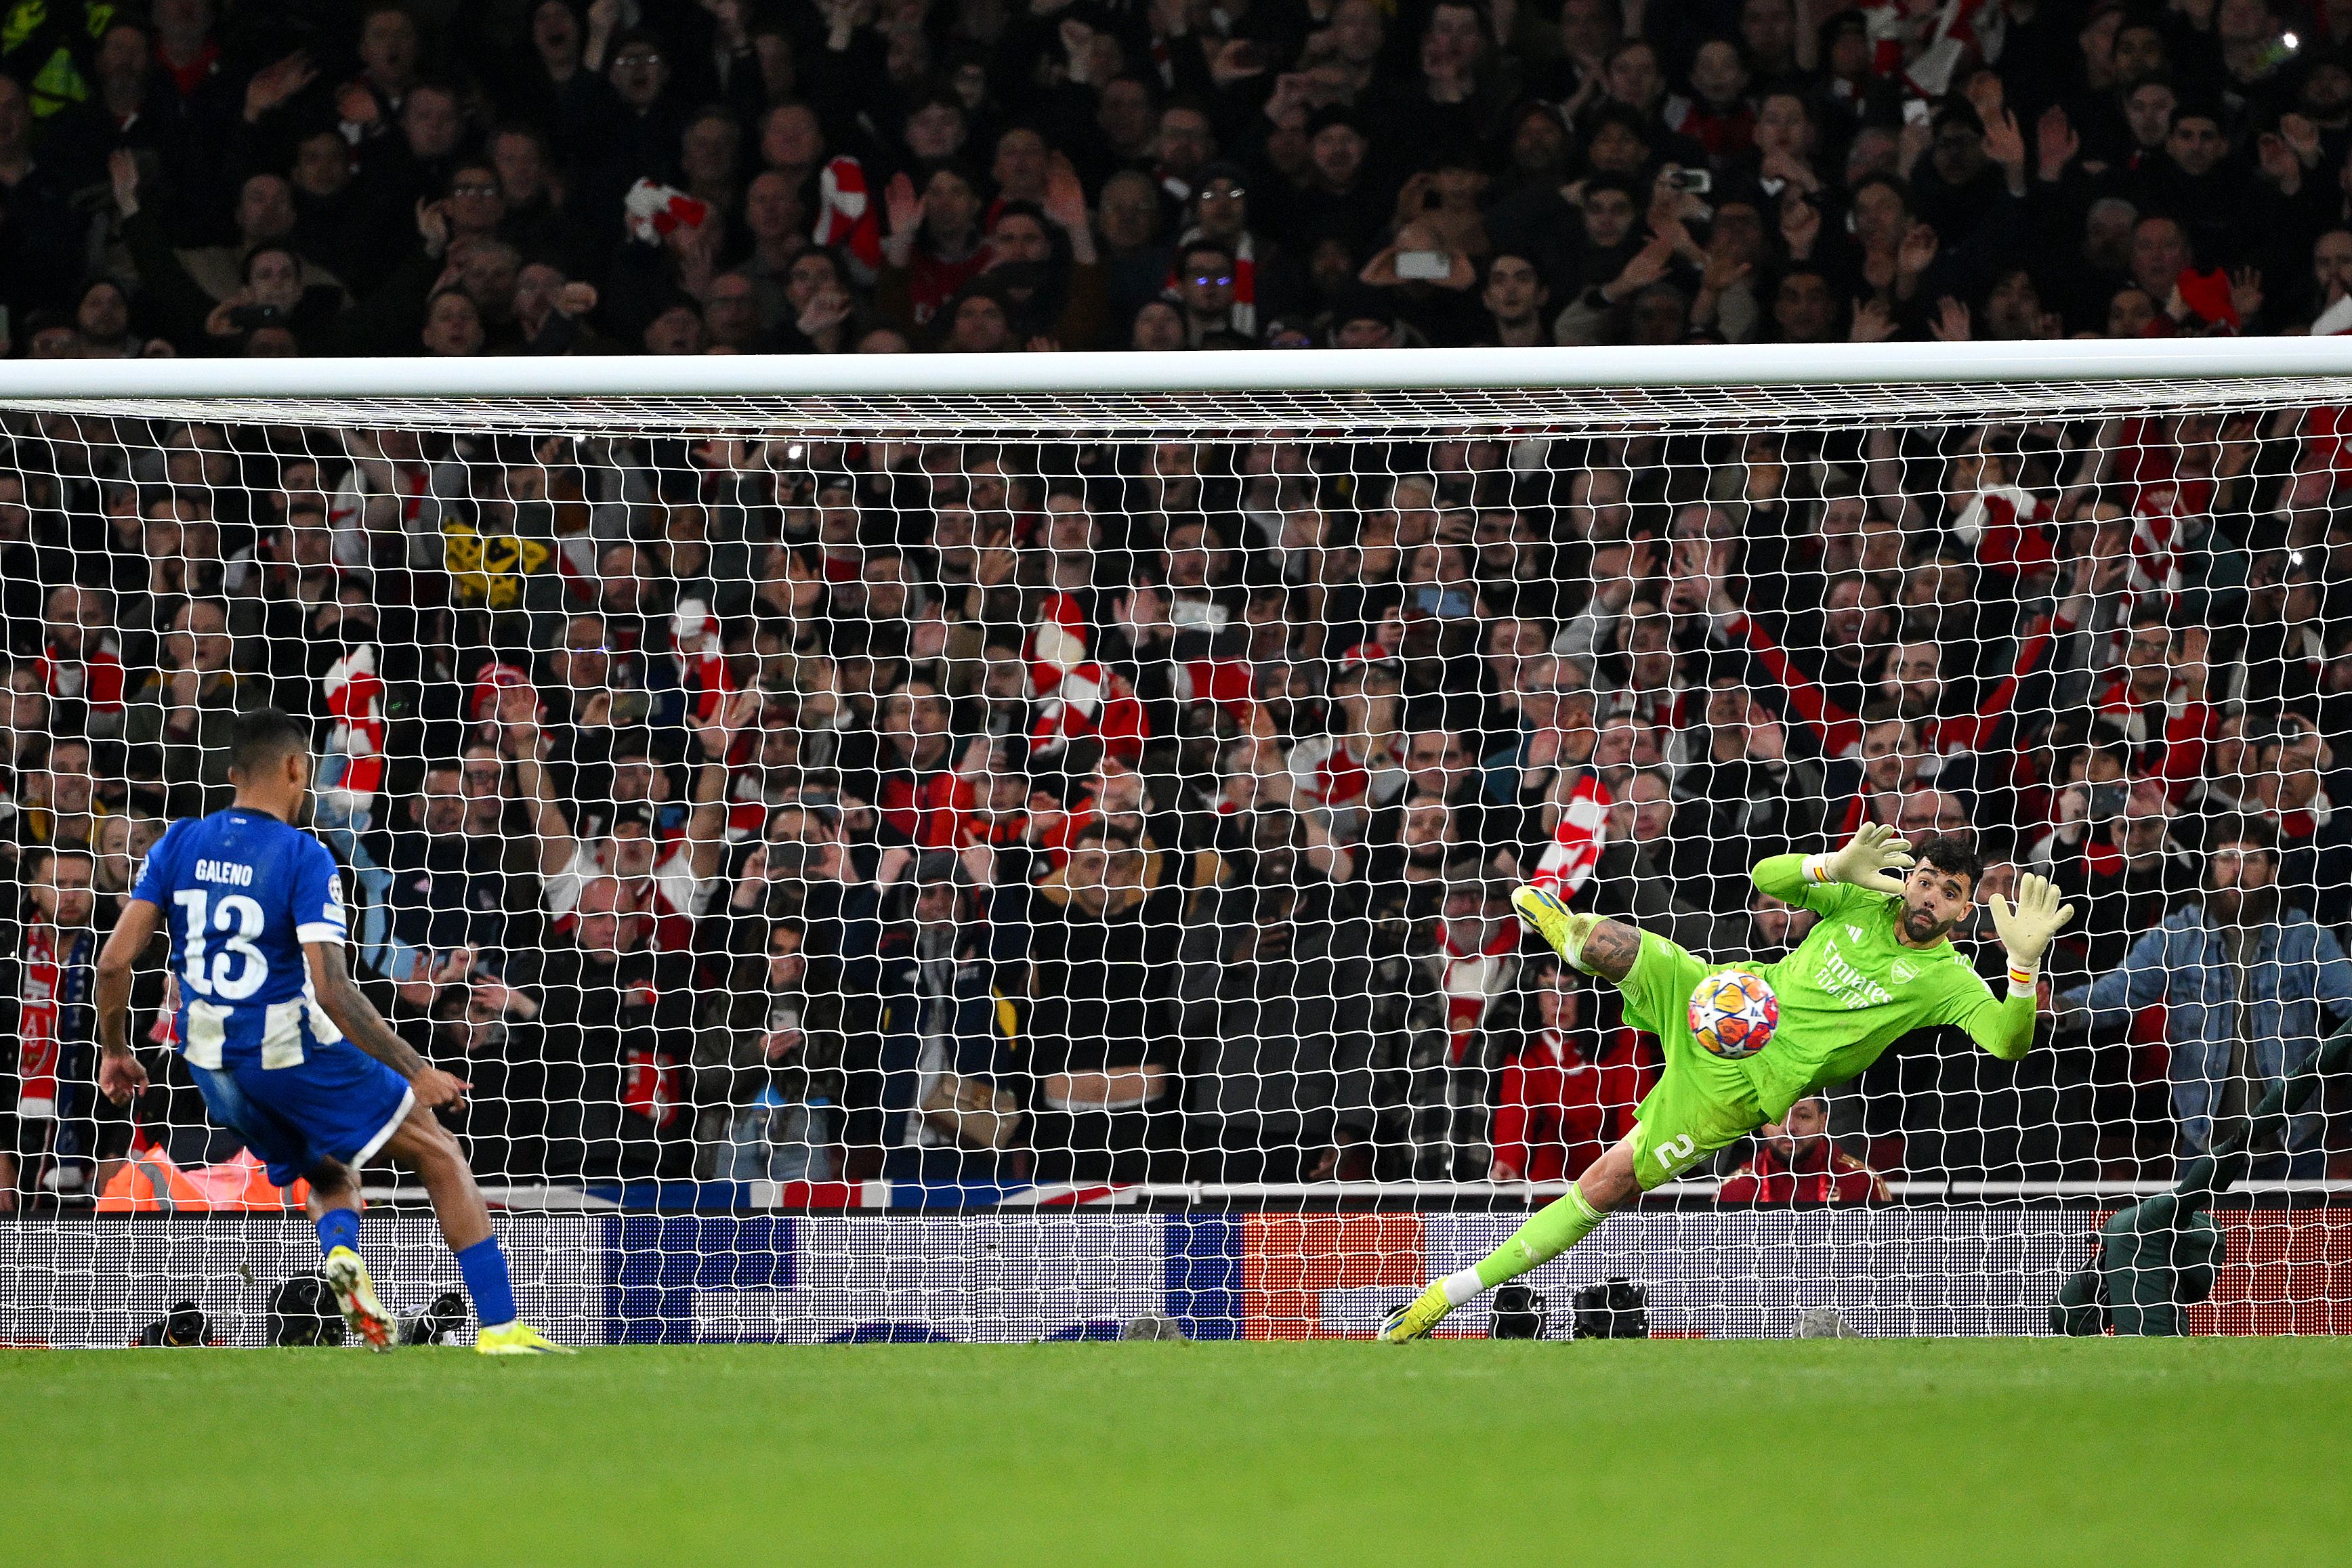 Arsenal could meet Man City in the UCL quarters after David Raya's save knocked Porto out